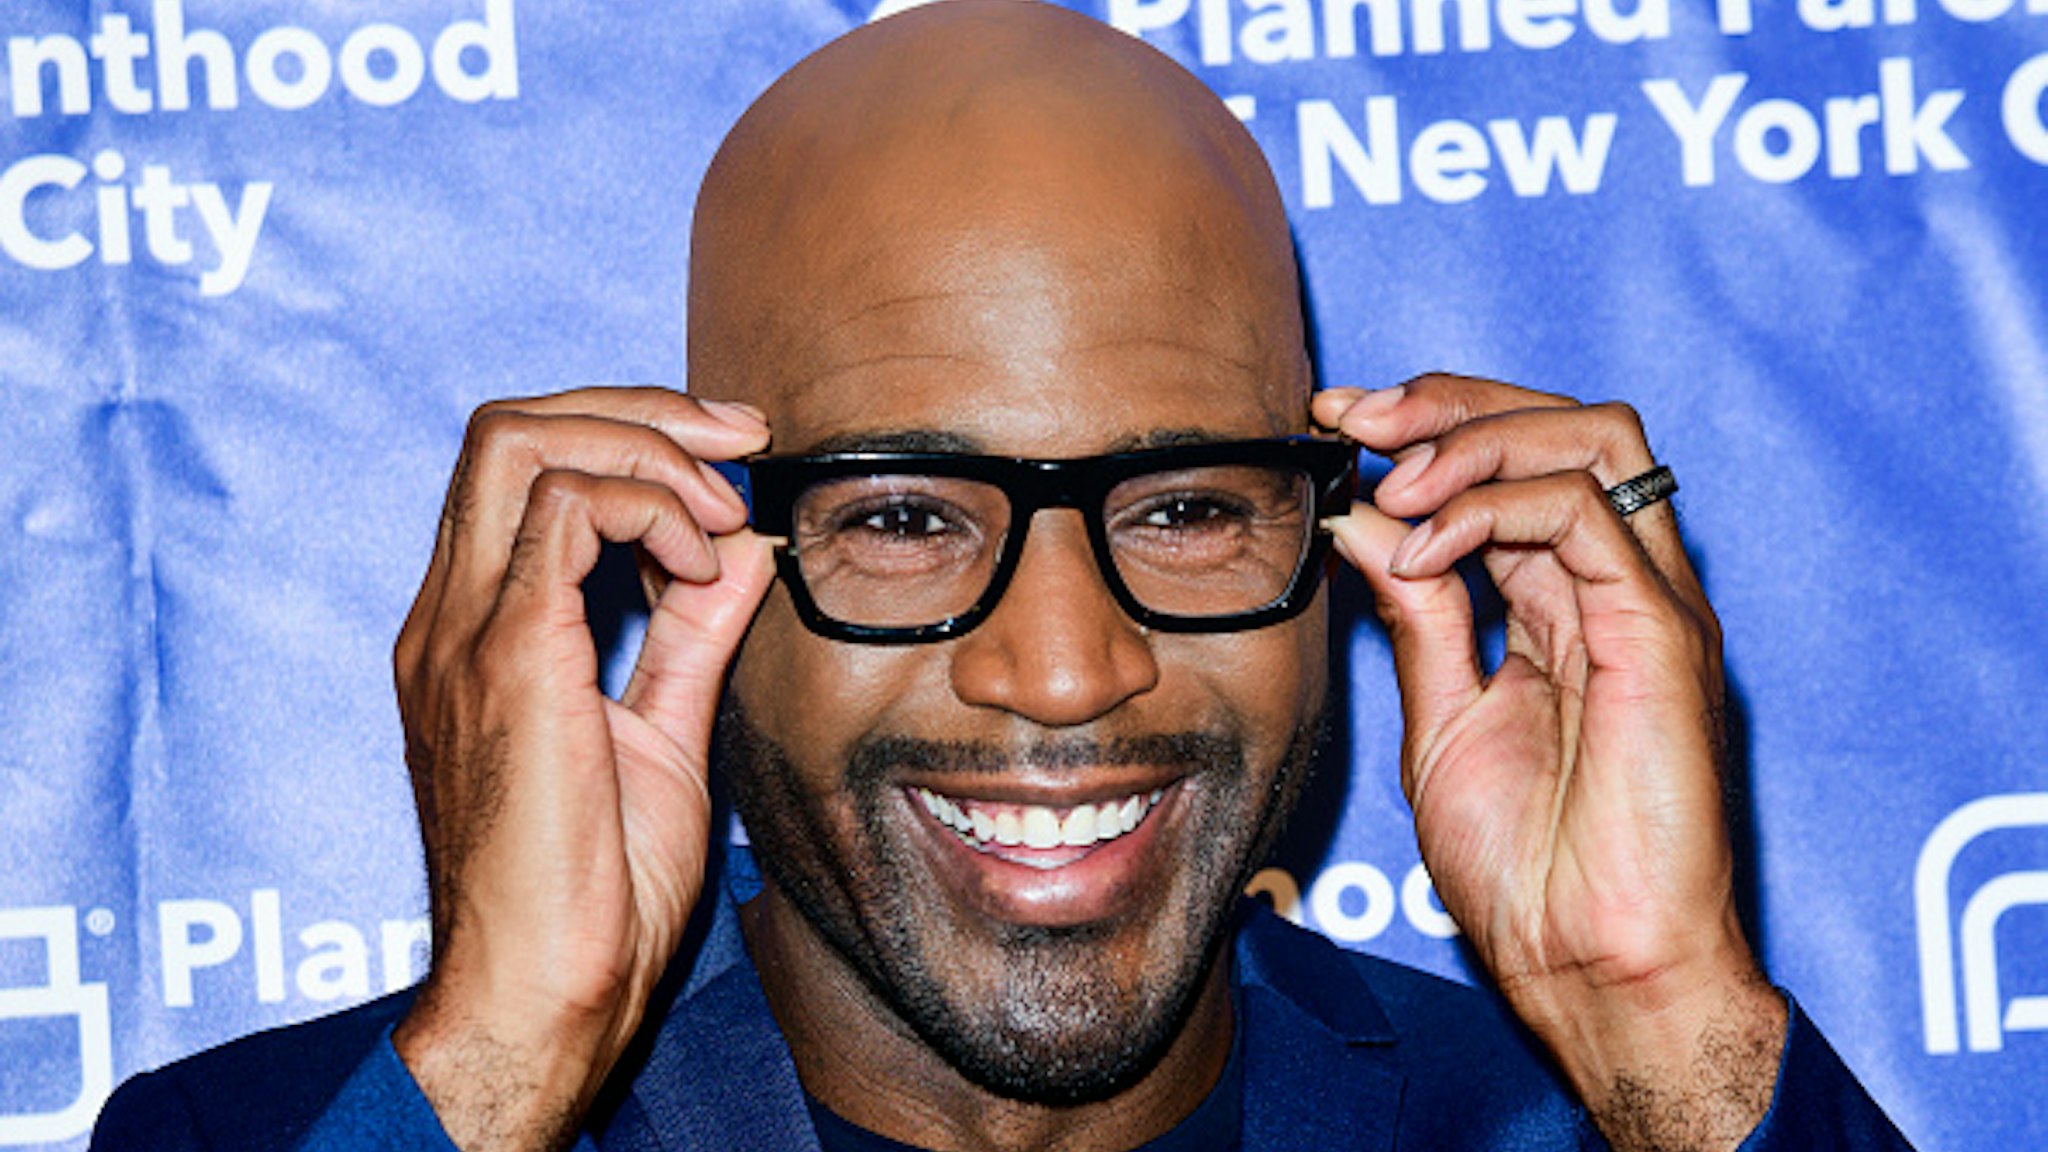 NEW YORK, NY - MAY 01: Karamo Brown attends the Planned Parenthood Of NYC / Spring Into Action Gala 2019 at Center 415 on May 1, 2019 in New York City.